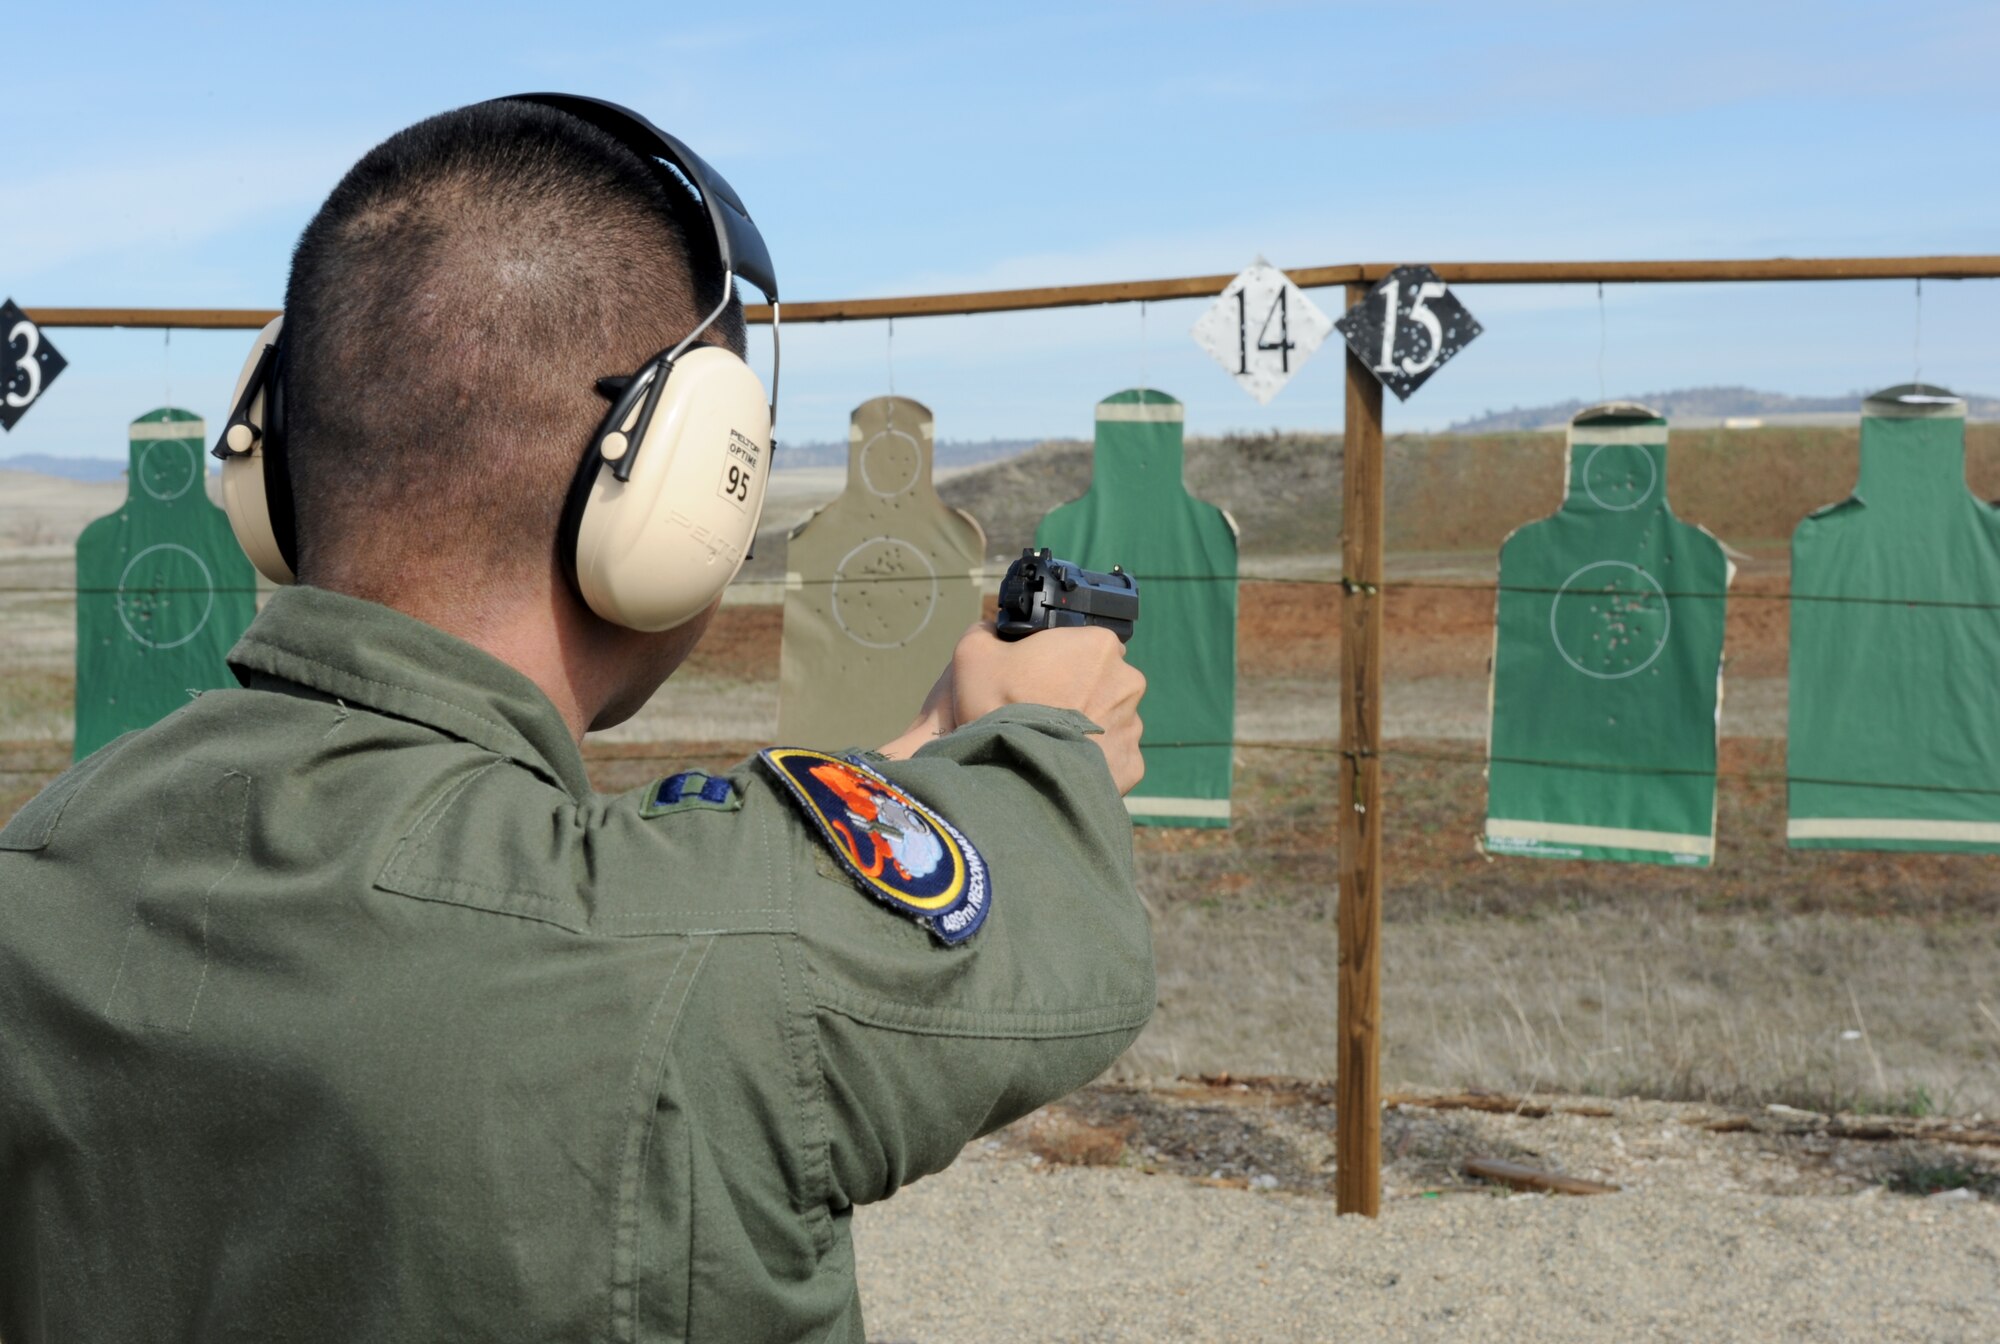 An Airman fires the M-9 pistol during a weapons qualification course at Beale Air Force Base, Calif., Feb. 11, 2014. Students with high marksmanship scores in the M-16, M-4, or M-9 courses can be awarded the small arms marksmanship ribbon.  (U.S. Air Force photo by Staff Sgt. Robert M. Trujillo/Released)